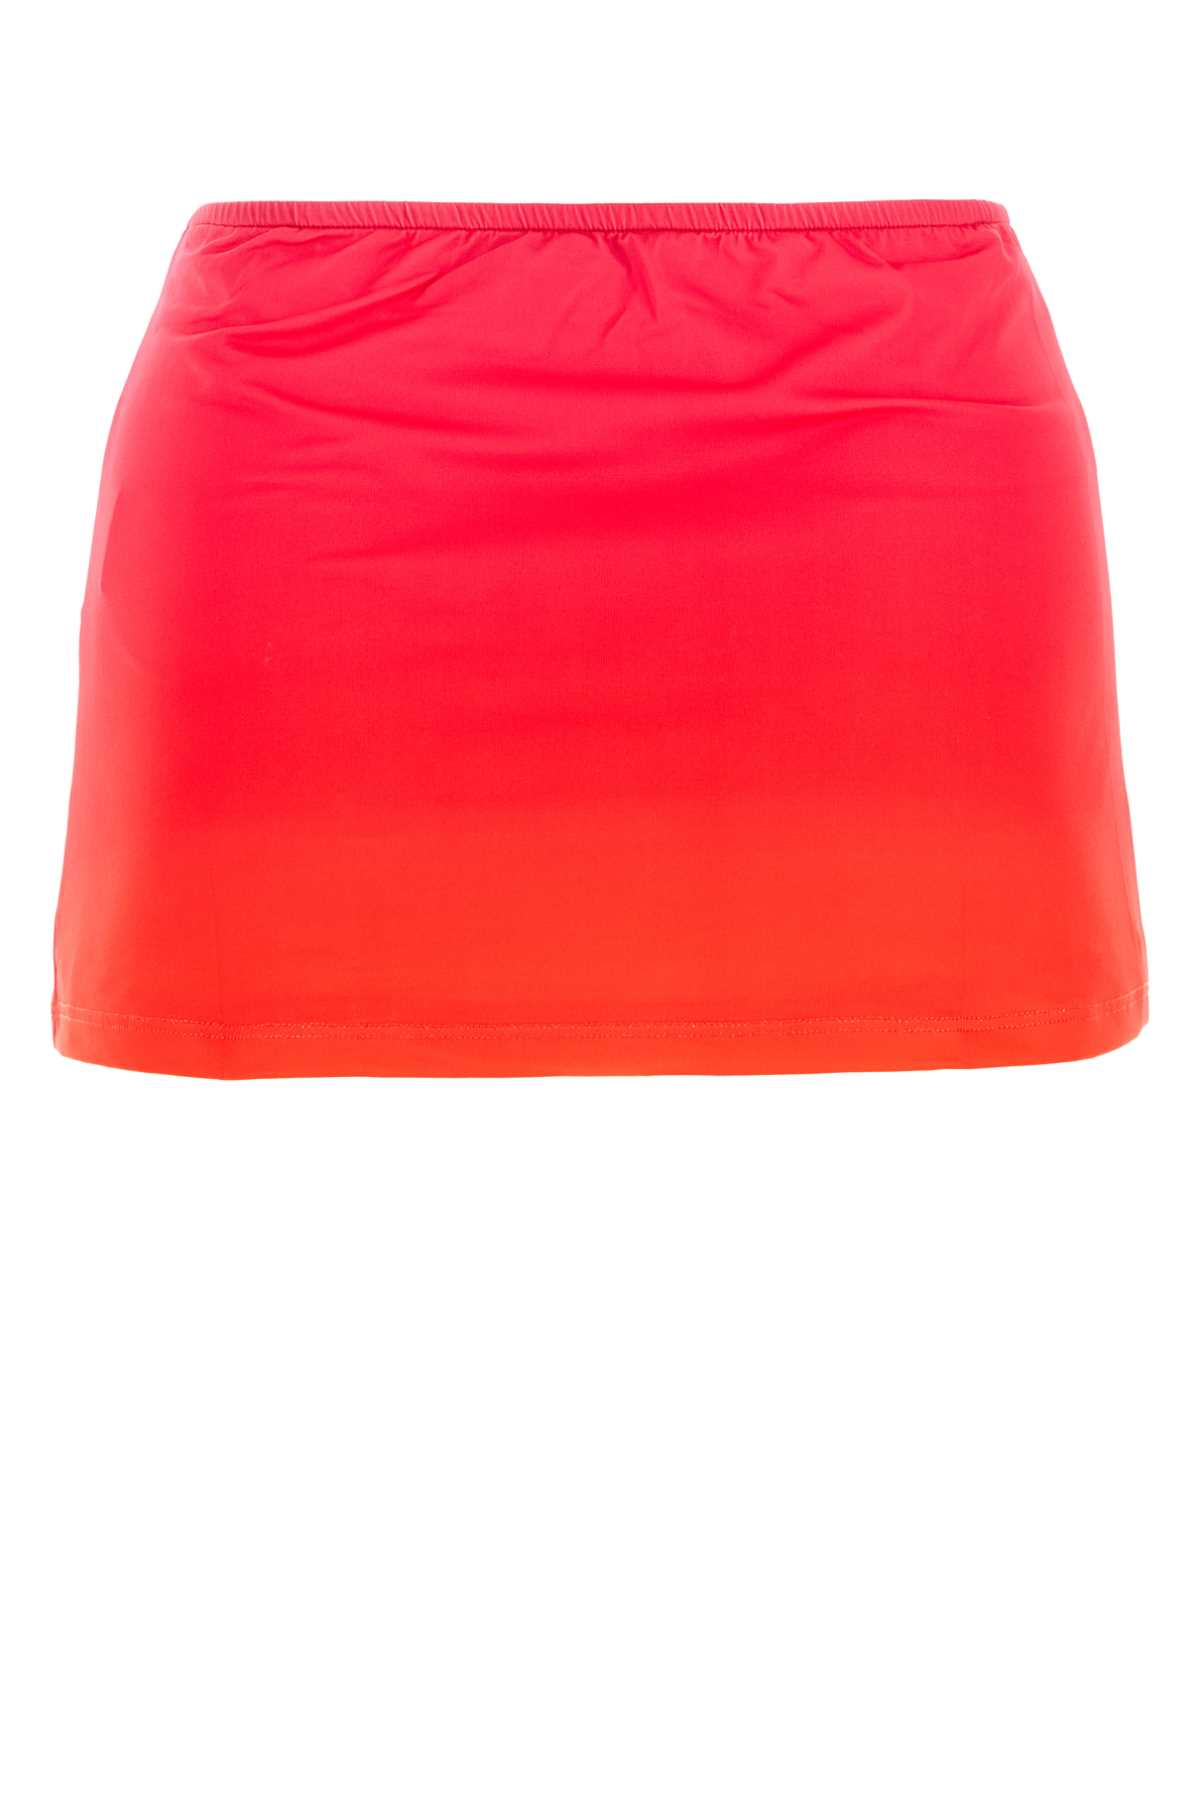 Gimaguas Two-tone Polyester Alba Miniskirt In Pink